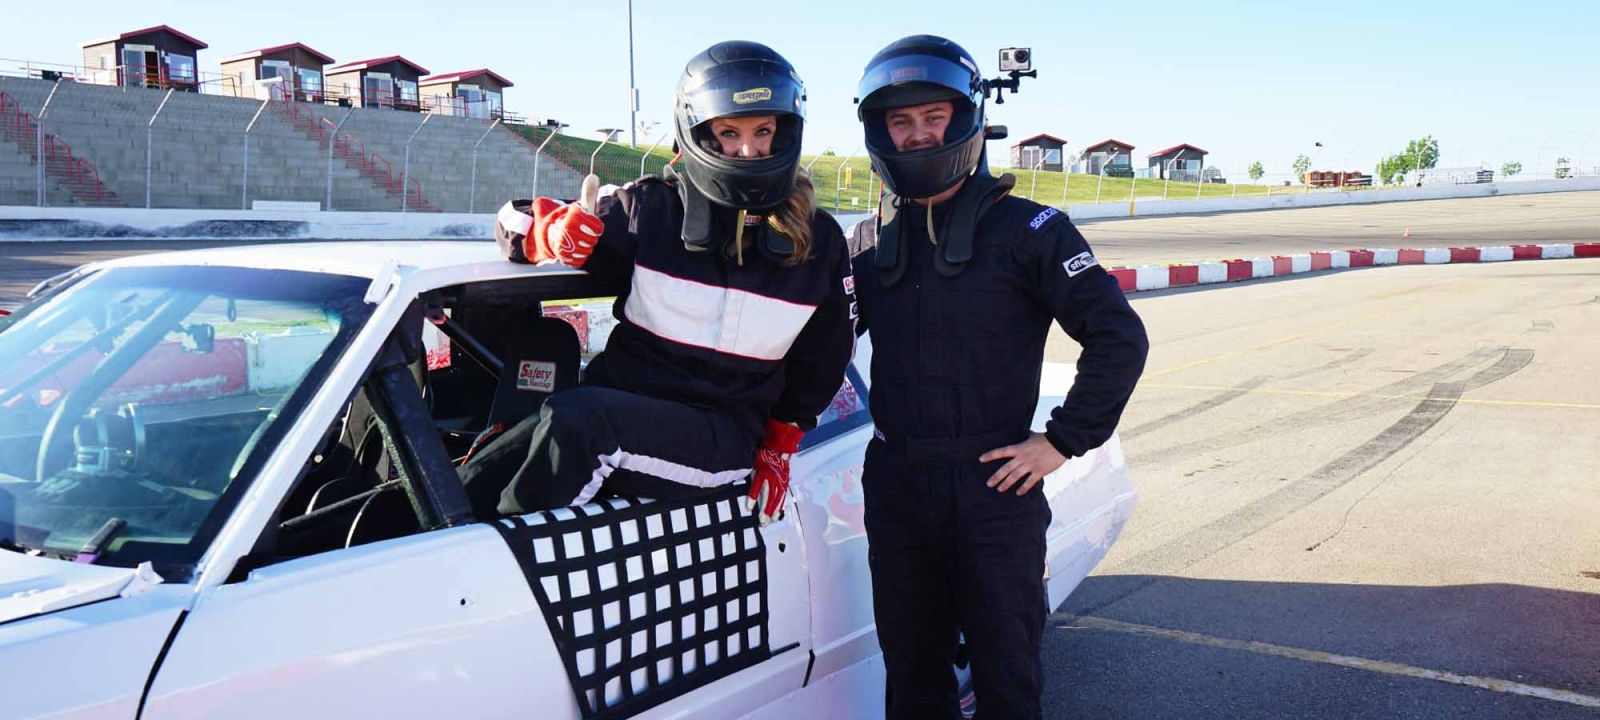 Driving a Race Car at the Wyant Group Raceway